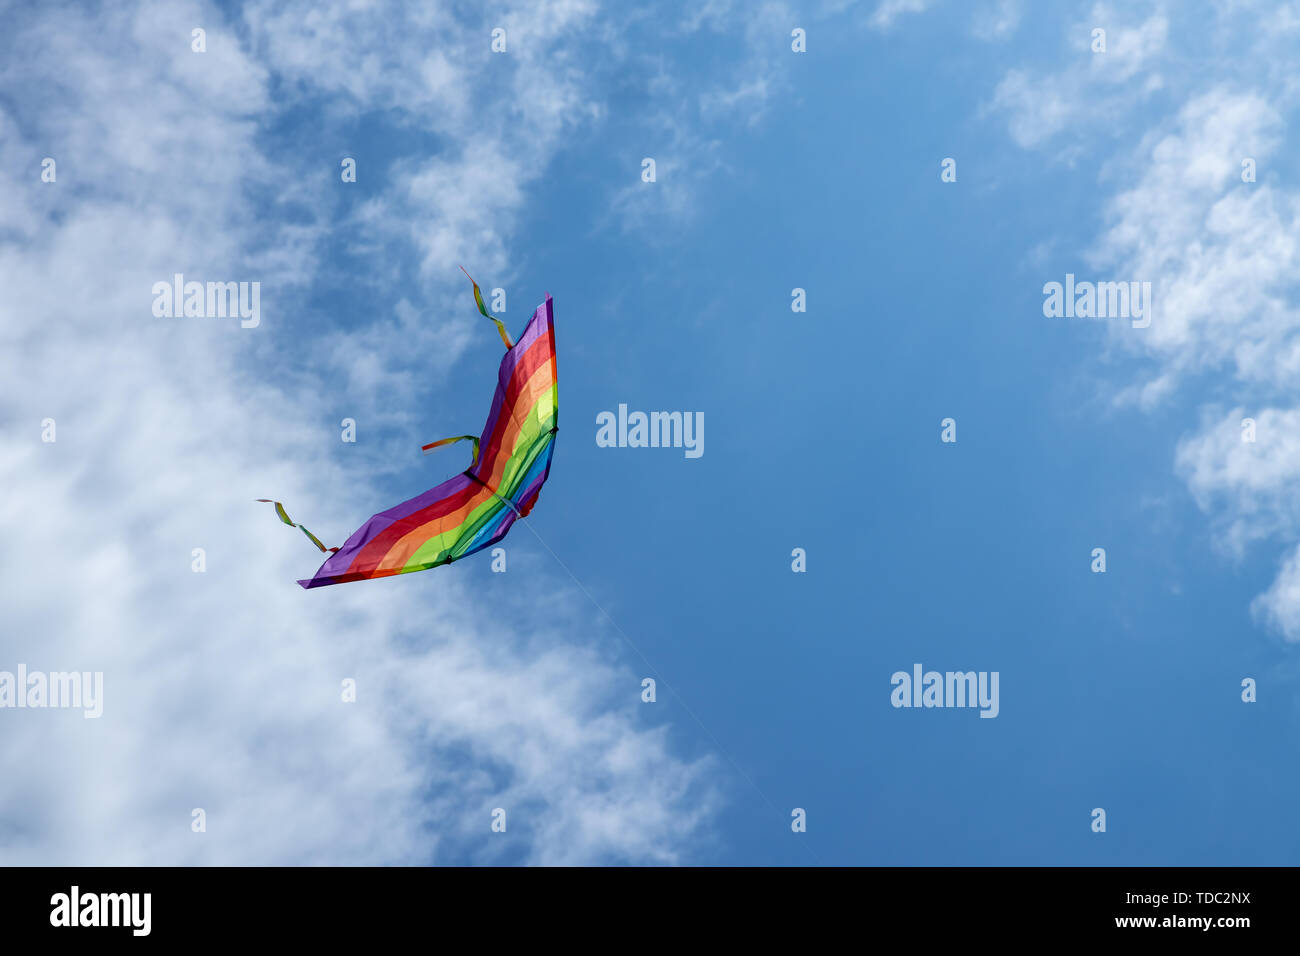 Multicolored kite on the background of the blue sky with clouds Stock Photo